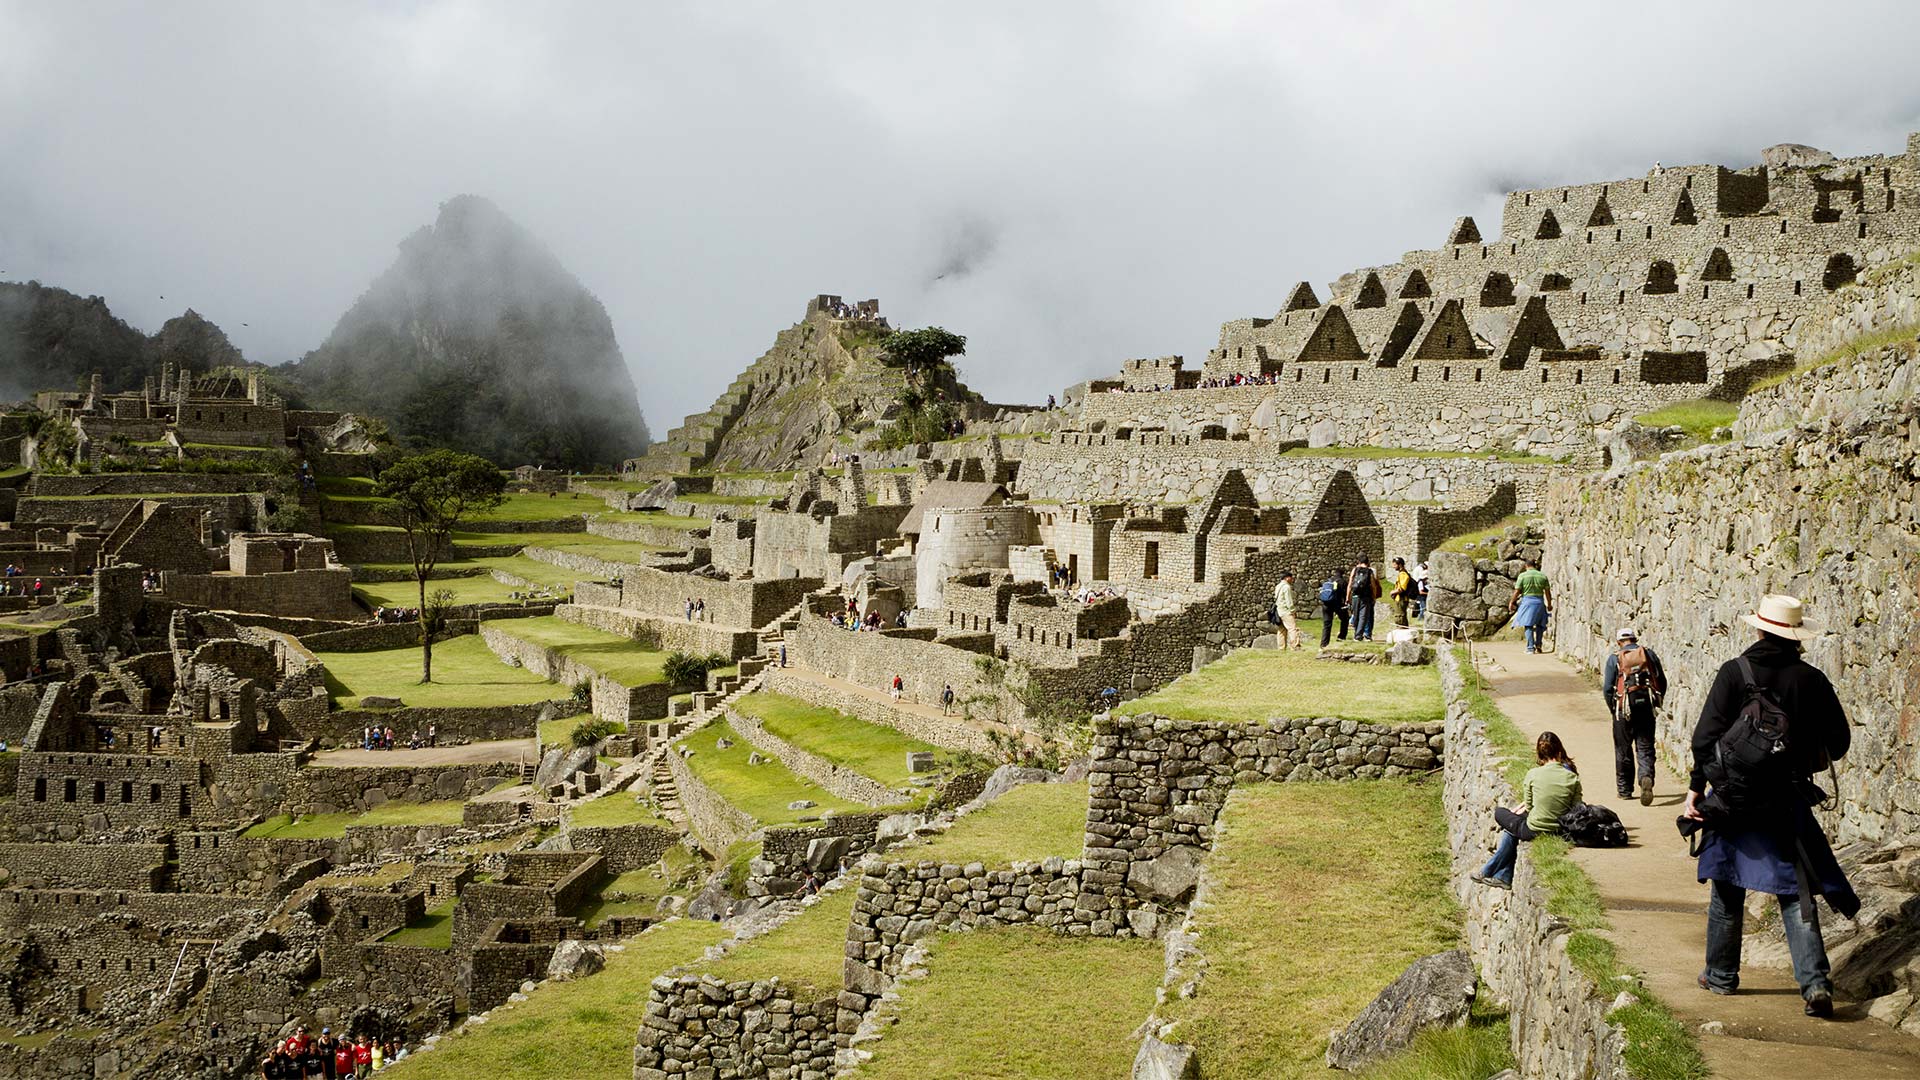 More on Making a Living Off of Incas Architecture